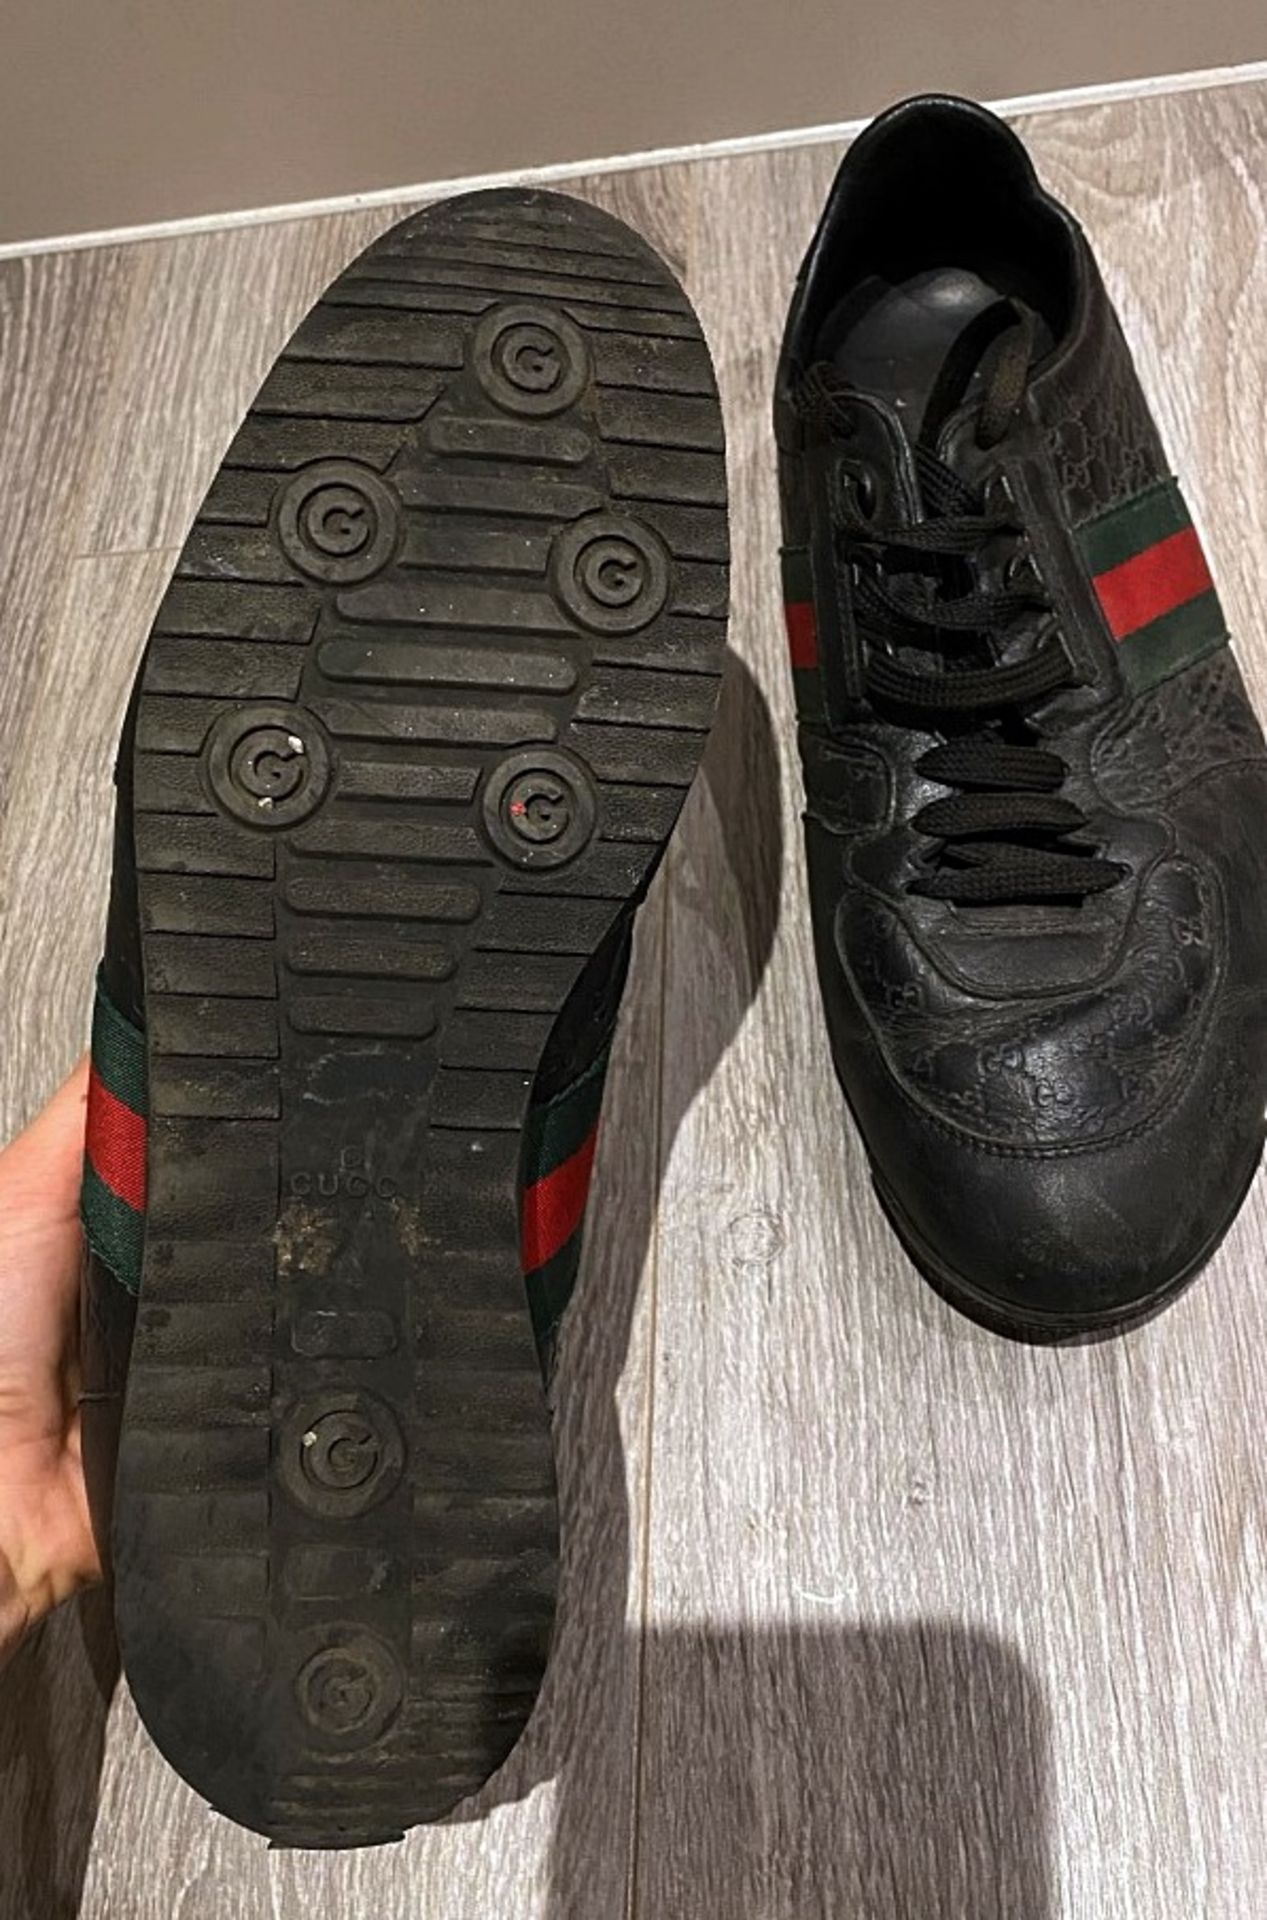 1 x Pair Of Genuine Gucci Mens Trainers In Black - Size: UK 8.5 - Preowned in Worn Condition - Ref - Image 4 of 4